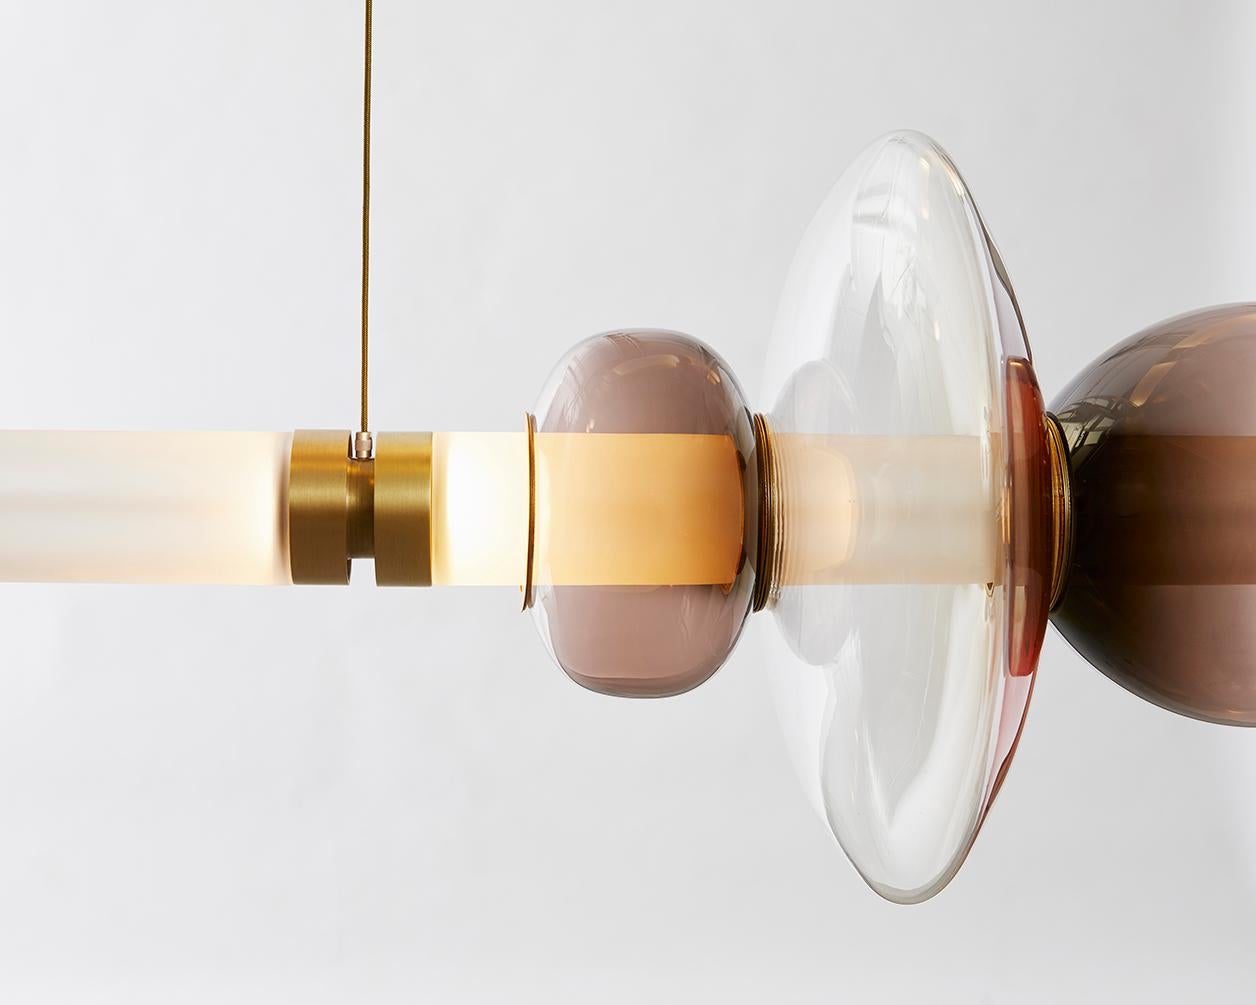 A lighting system with infinite interpretations, the Luna Chandelier XL 1 Tier  is a synergy of color, shape, and refracted light. Inspired by a lunar halo, the modular light fixture grows in every direction as its assembly system stems horizontally